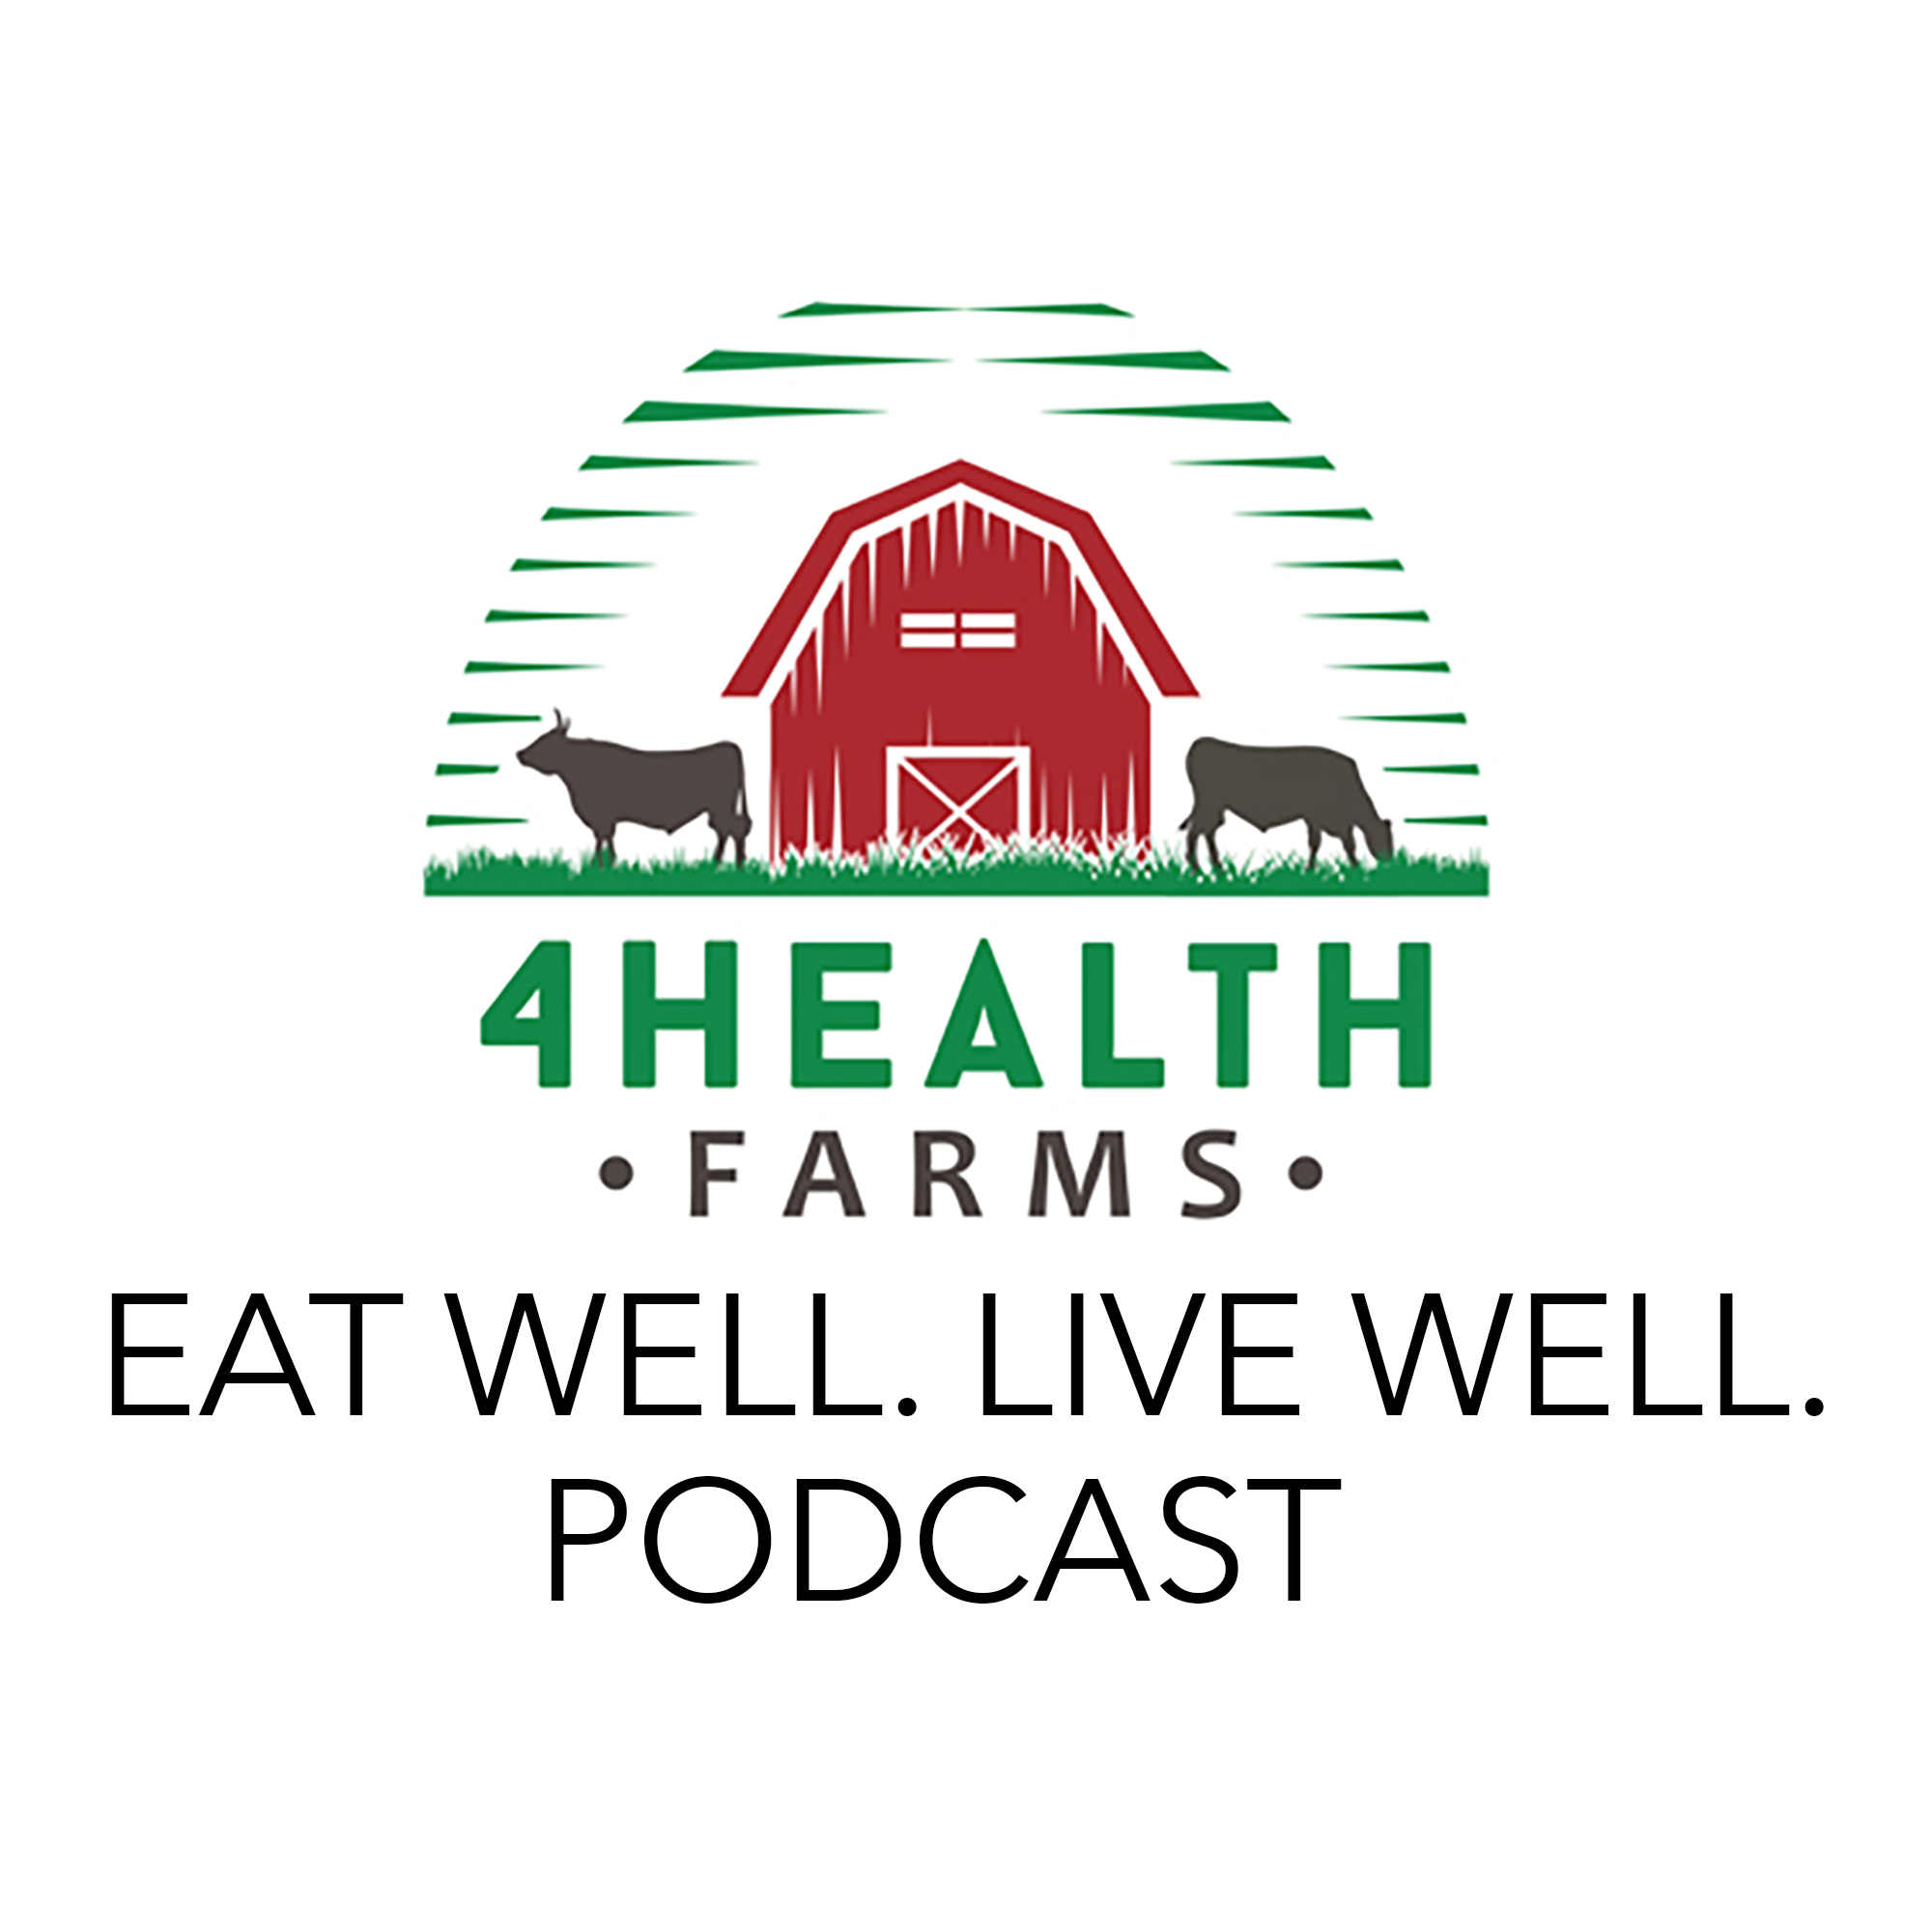 4 Health Farms: EAT WELL. LIVE WELL